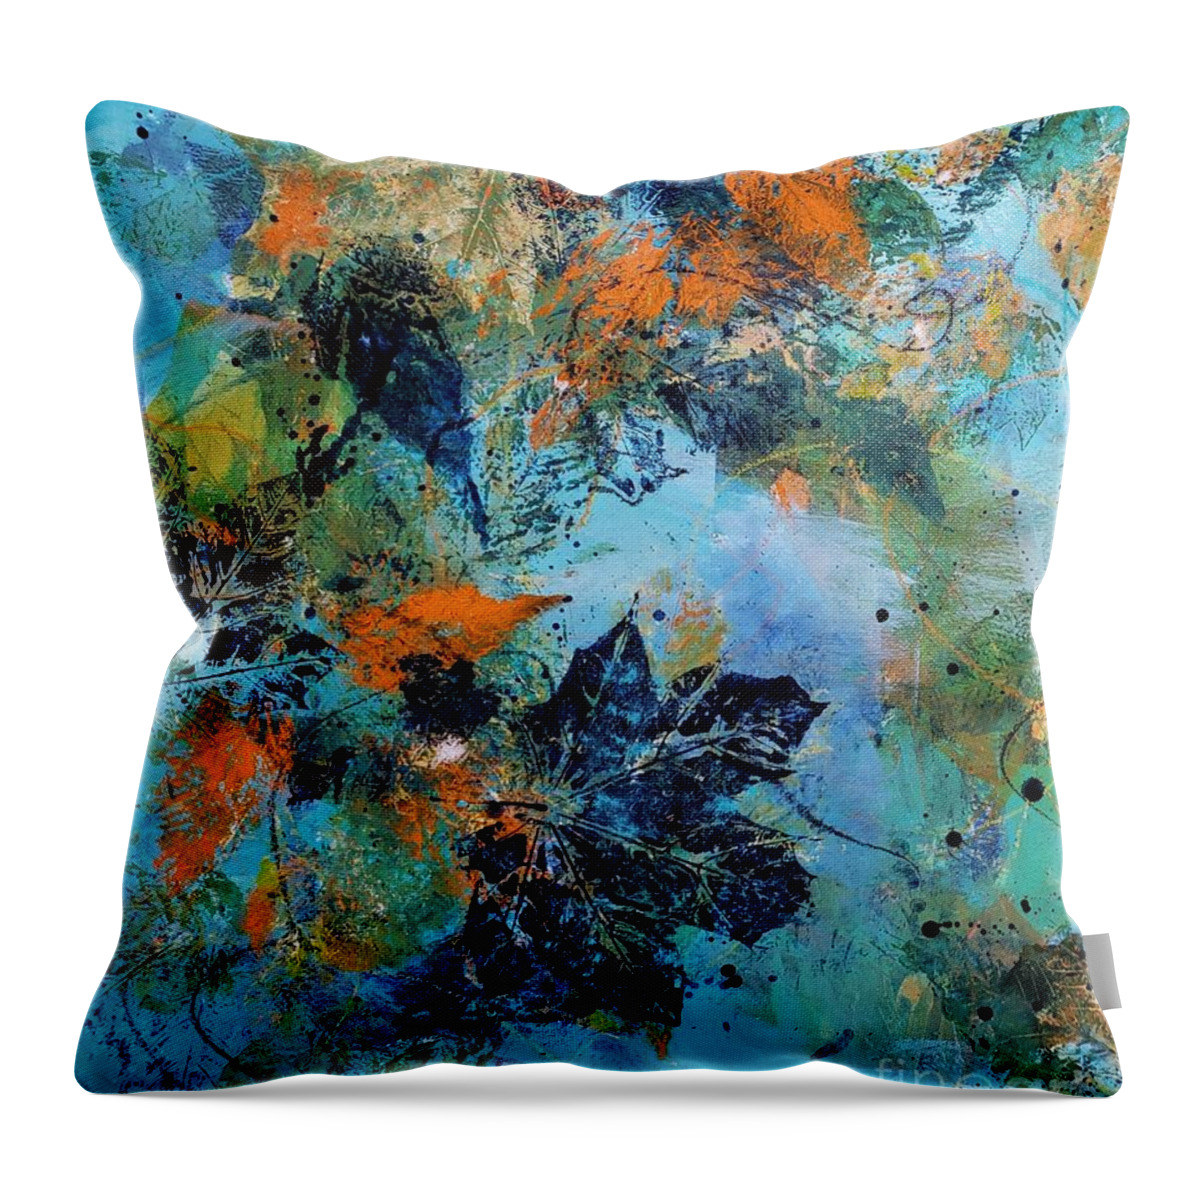 Fall Foliage Throw Pillow featuring the painting Simply Fall by Lisa Debaets